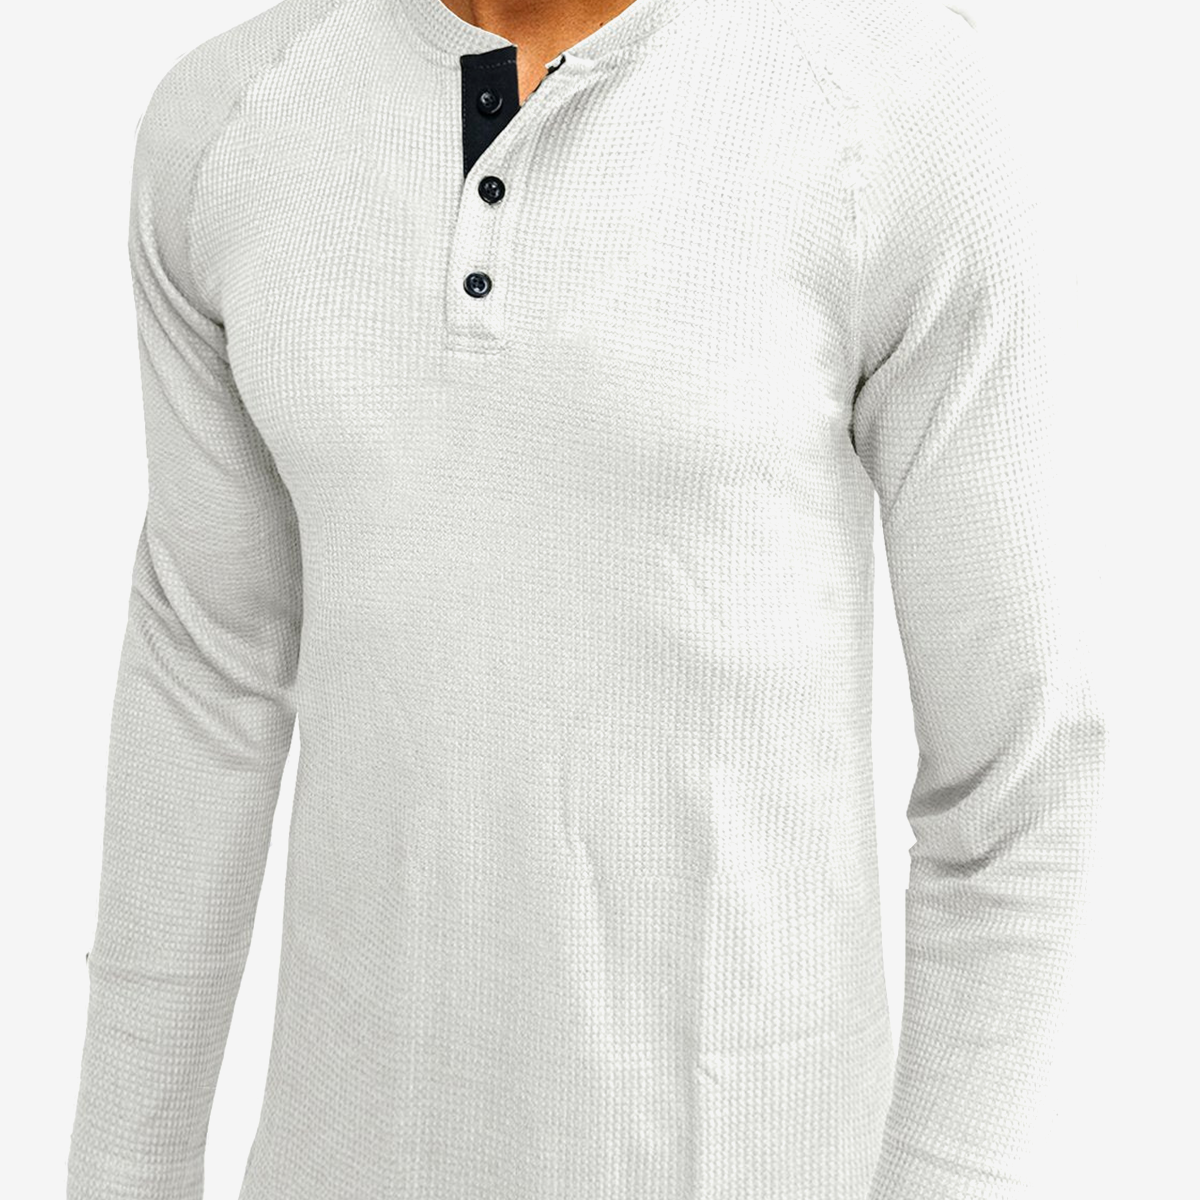 Men's Casual Solid Color Long Sleeve T-shirt